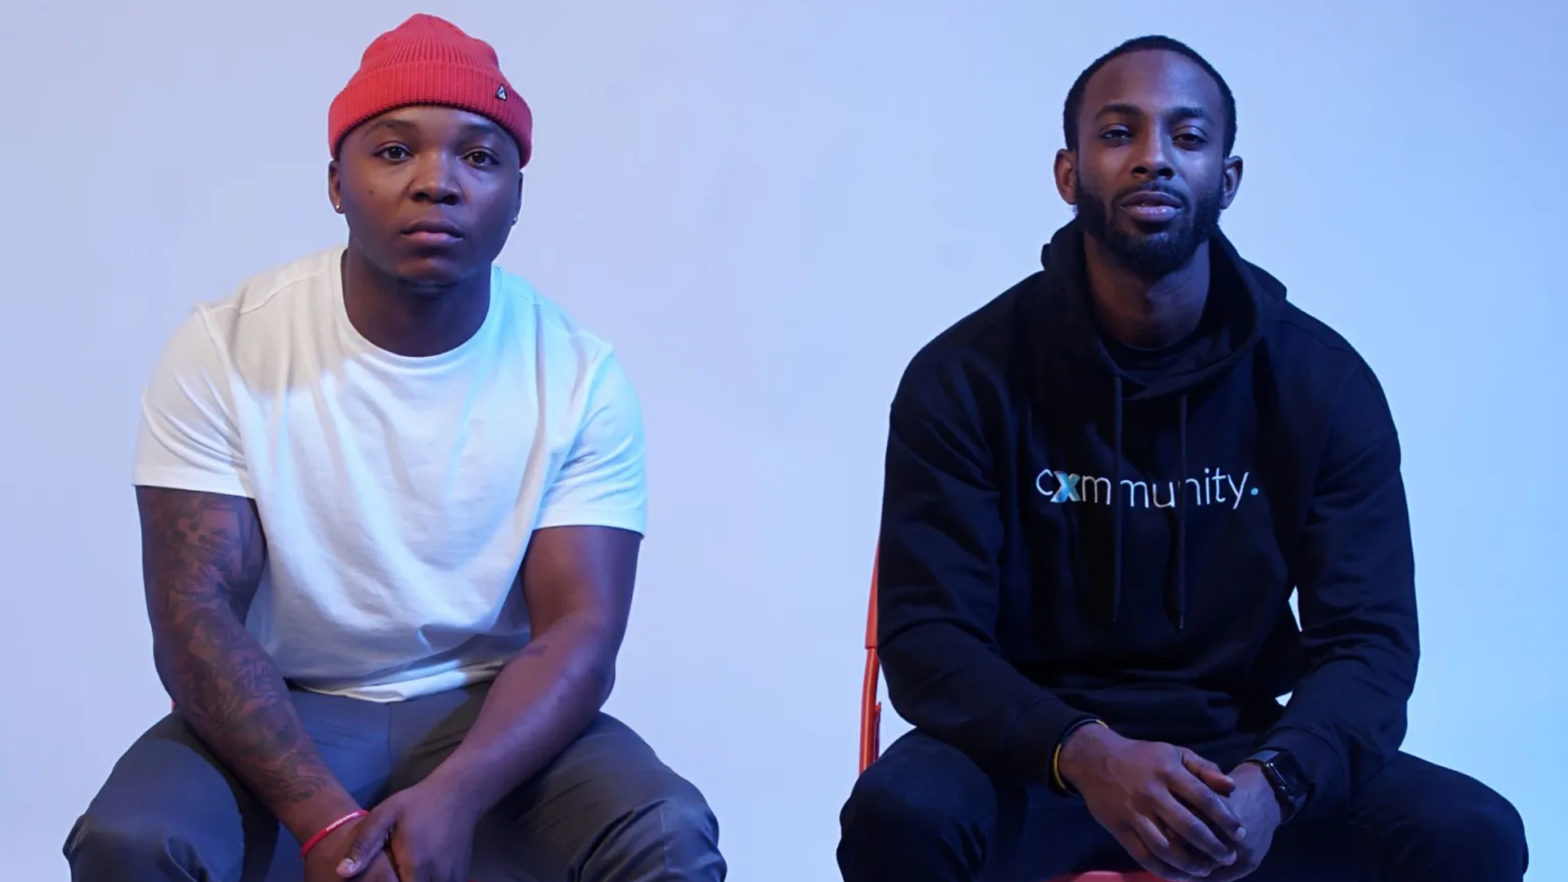 These Founders Are Helping Black Youth Land Jobs And Tap Into Esports Through Their 'Cxmmunity'